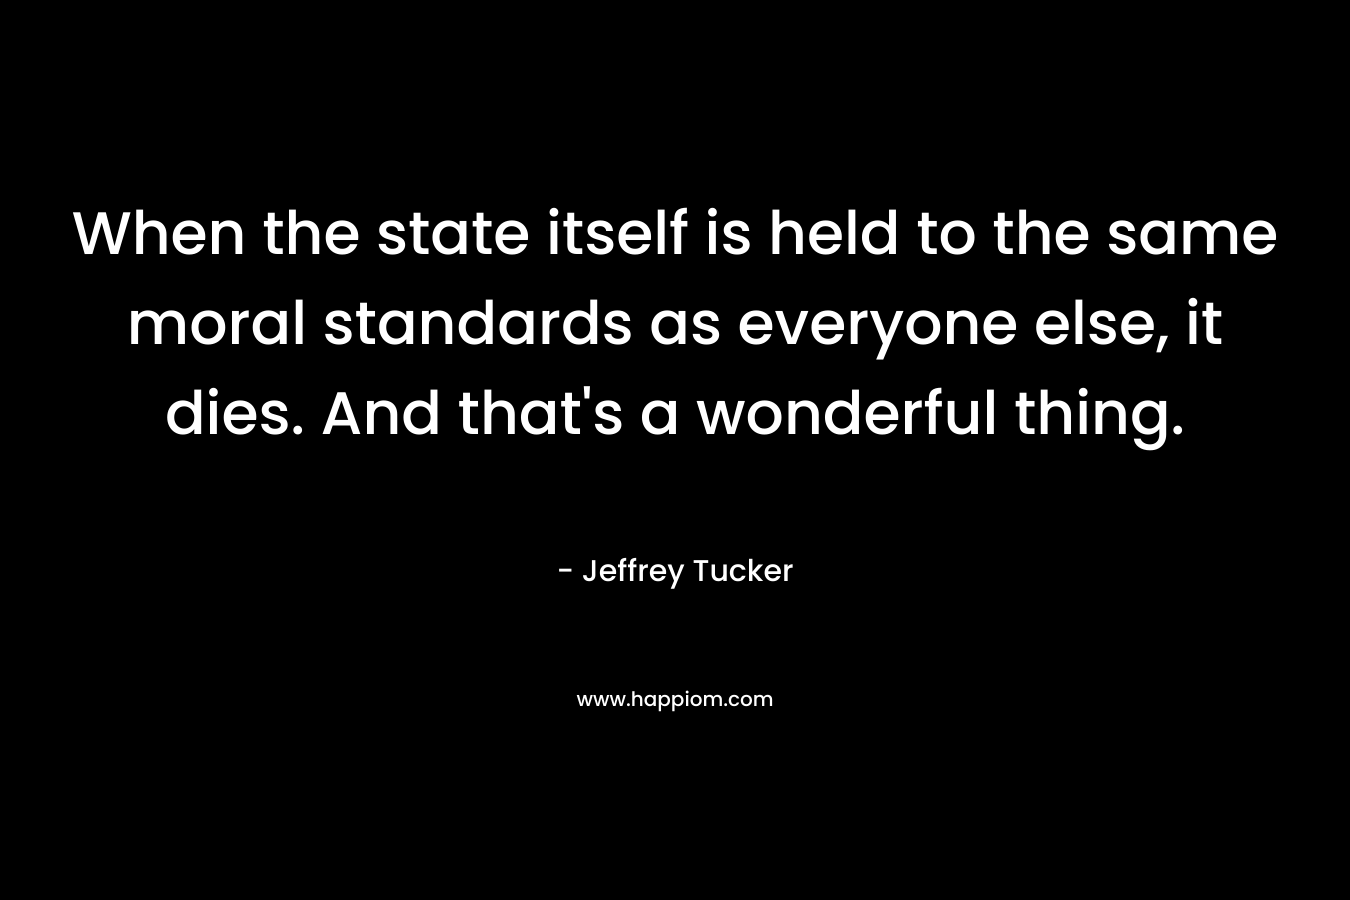 When the state itself is held to the same moral standards as everyone else, it dies. And that's a wonderful thing.